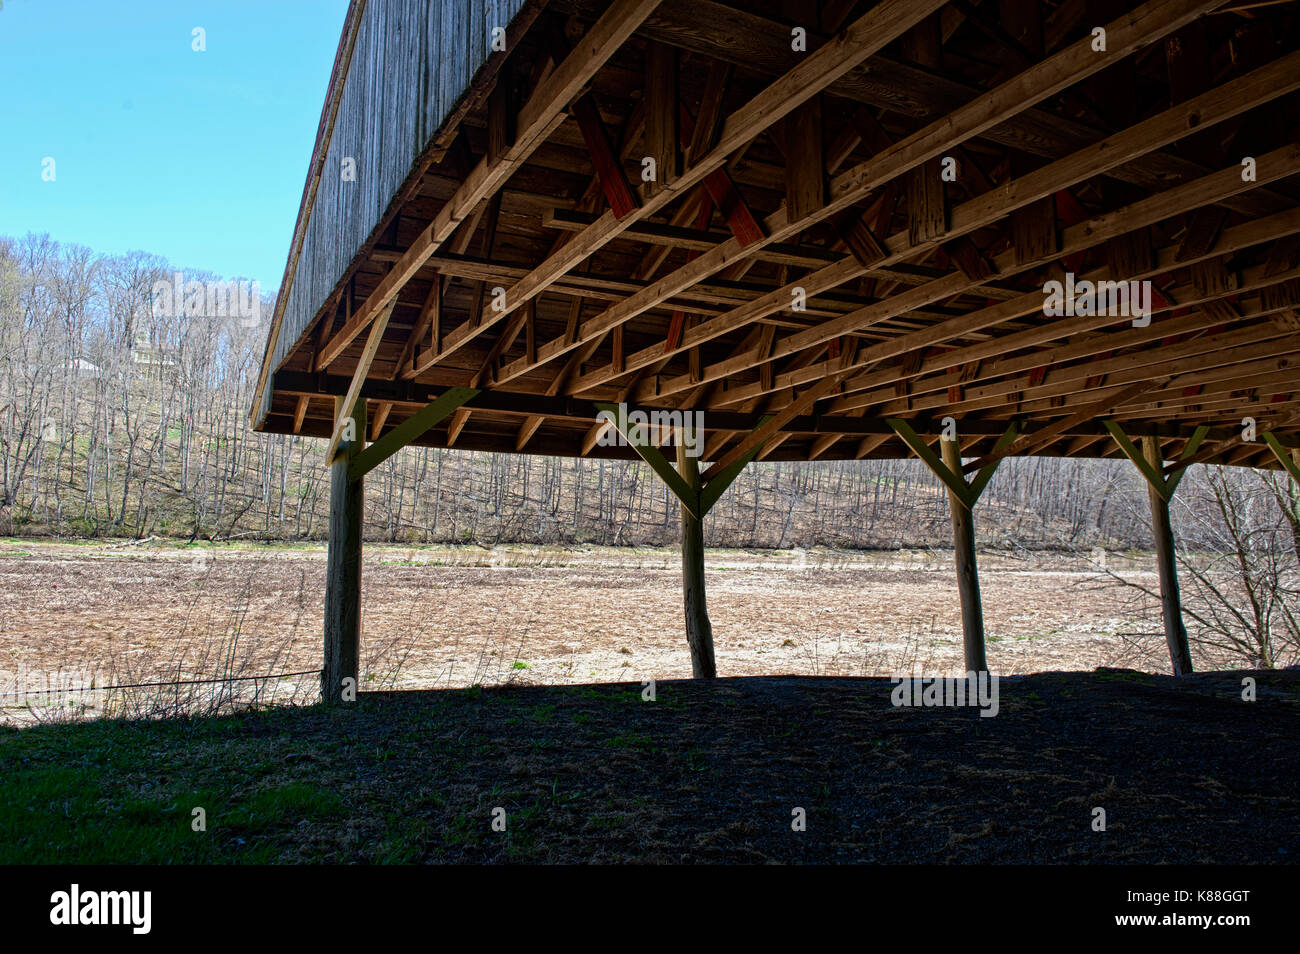 VIEW AROUND RECREATION PAVILLION AT DRY LAKE BED OF SPEEDWELL FORGE LAKE AFTER DRAINING DUE TO DAM DAMAGE, LITITZ PENNSYLVANIA Stock Photo